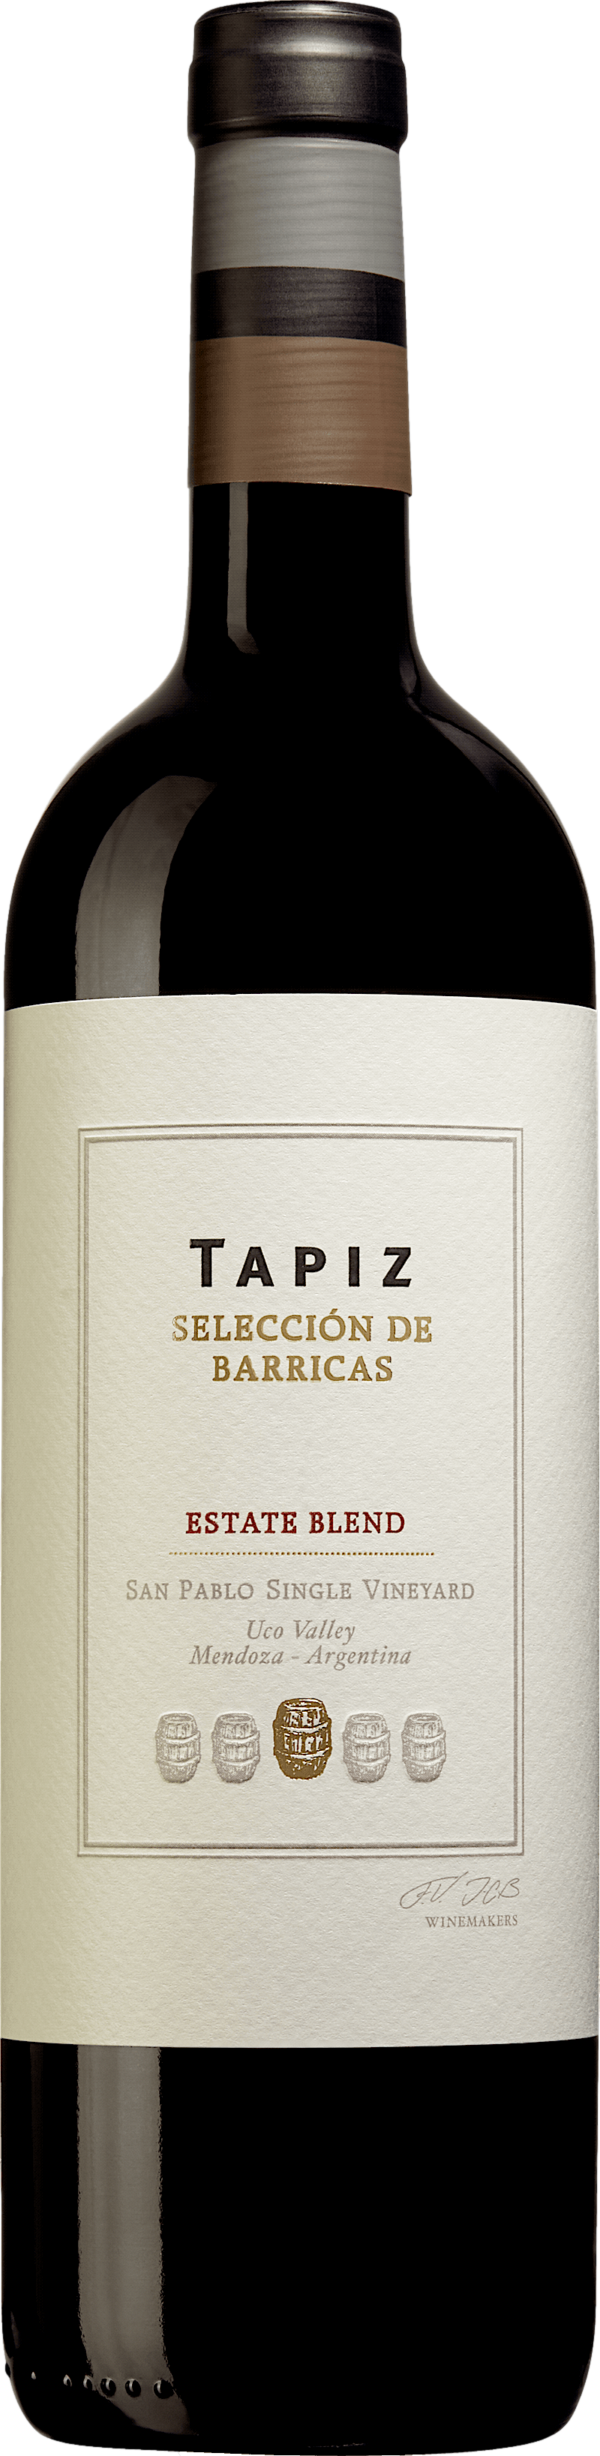 Product image of Tapiz Seleccion de Barricas 2019 from 8wines